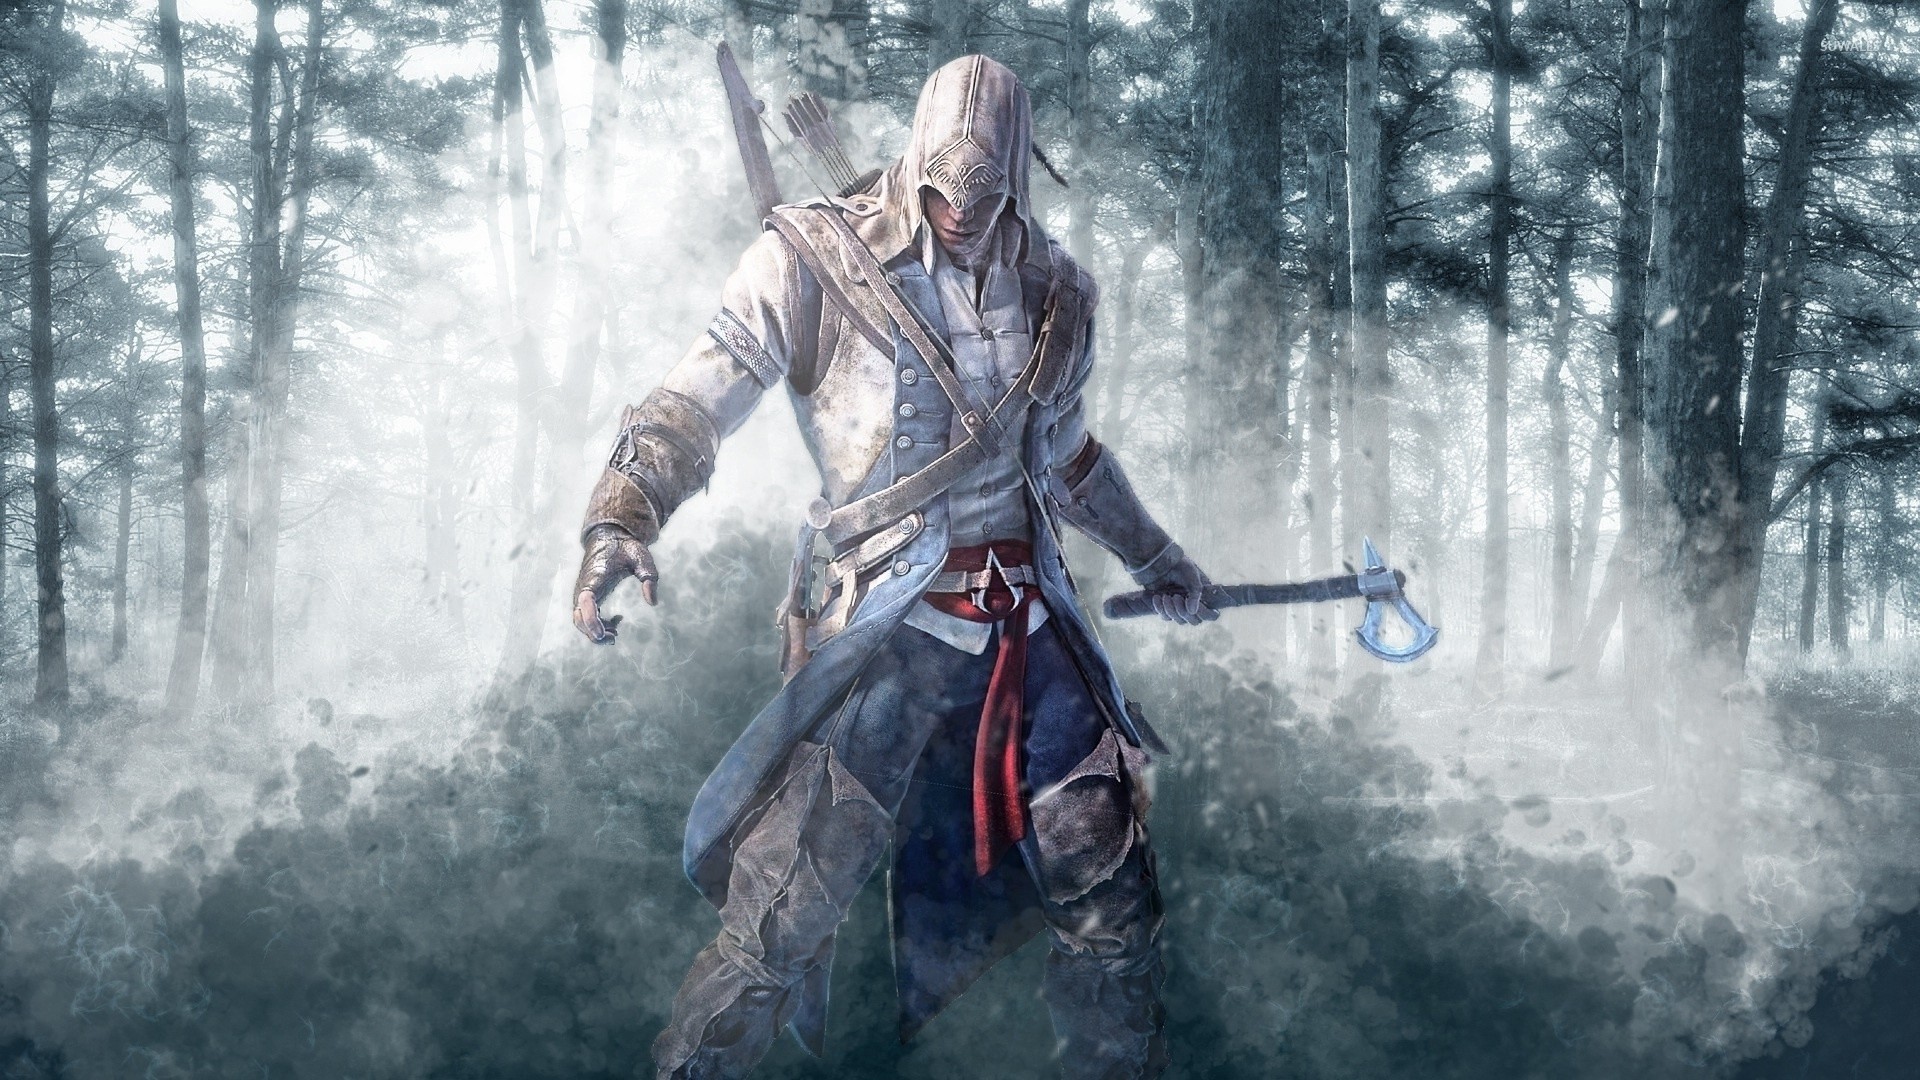 1920x1080 Ratonhnhake:ton in a foggy forest wallpaper Â· Games Â· Assassin's Creed Â· Assassin's  Creed III Â· Ratonhnhake:ton Â·  ...